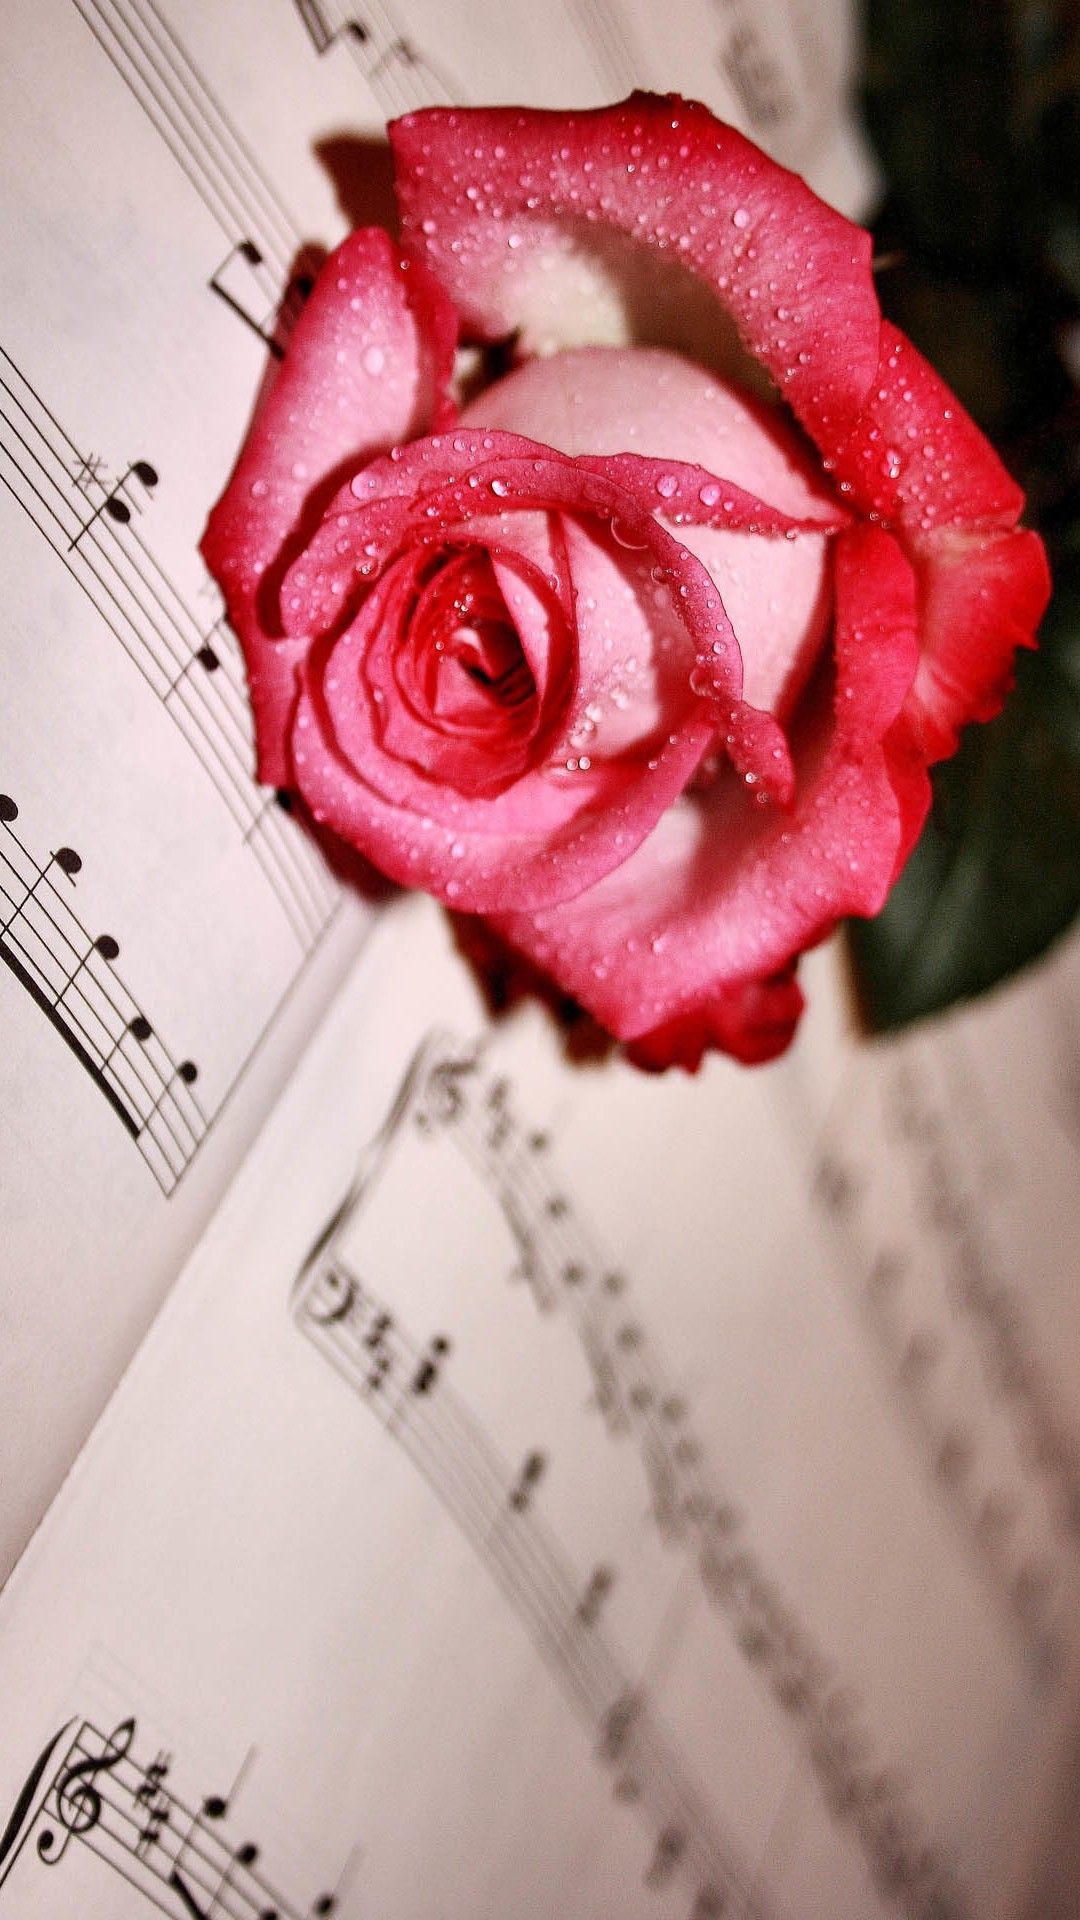 1080x1920, Dew Red Rose Lying Music Score - Music Notes And Flowers - HD Wallpaper 